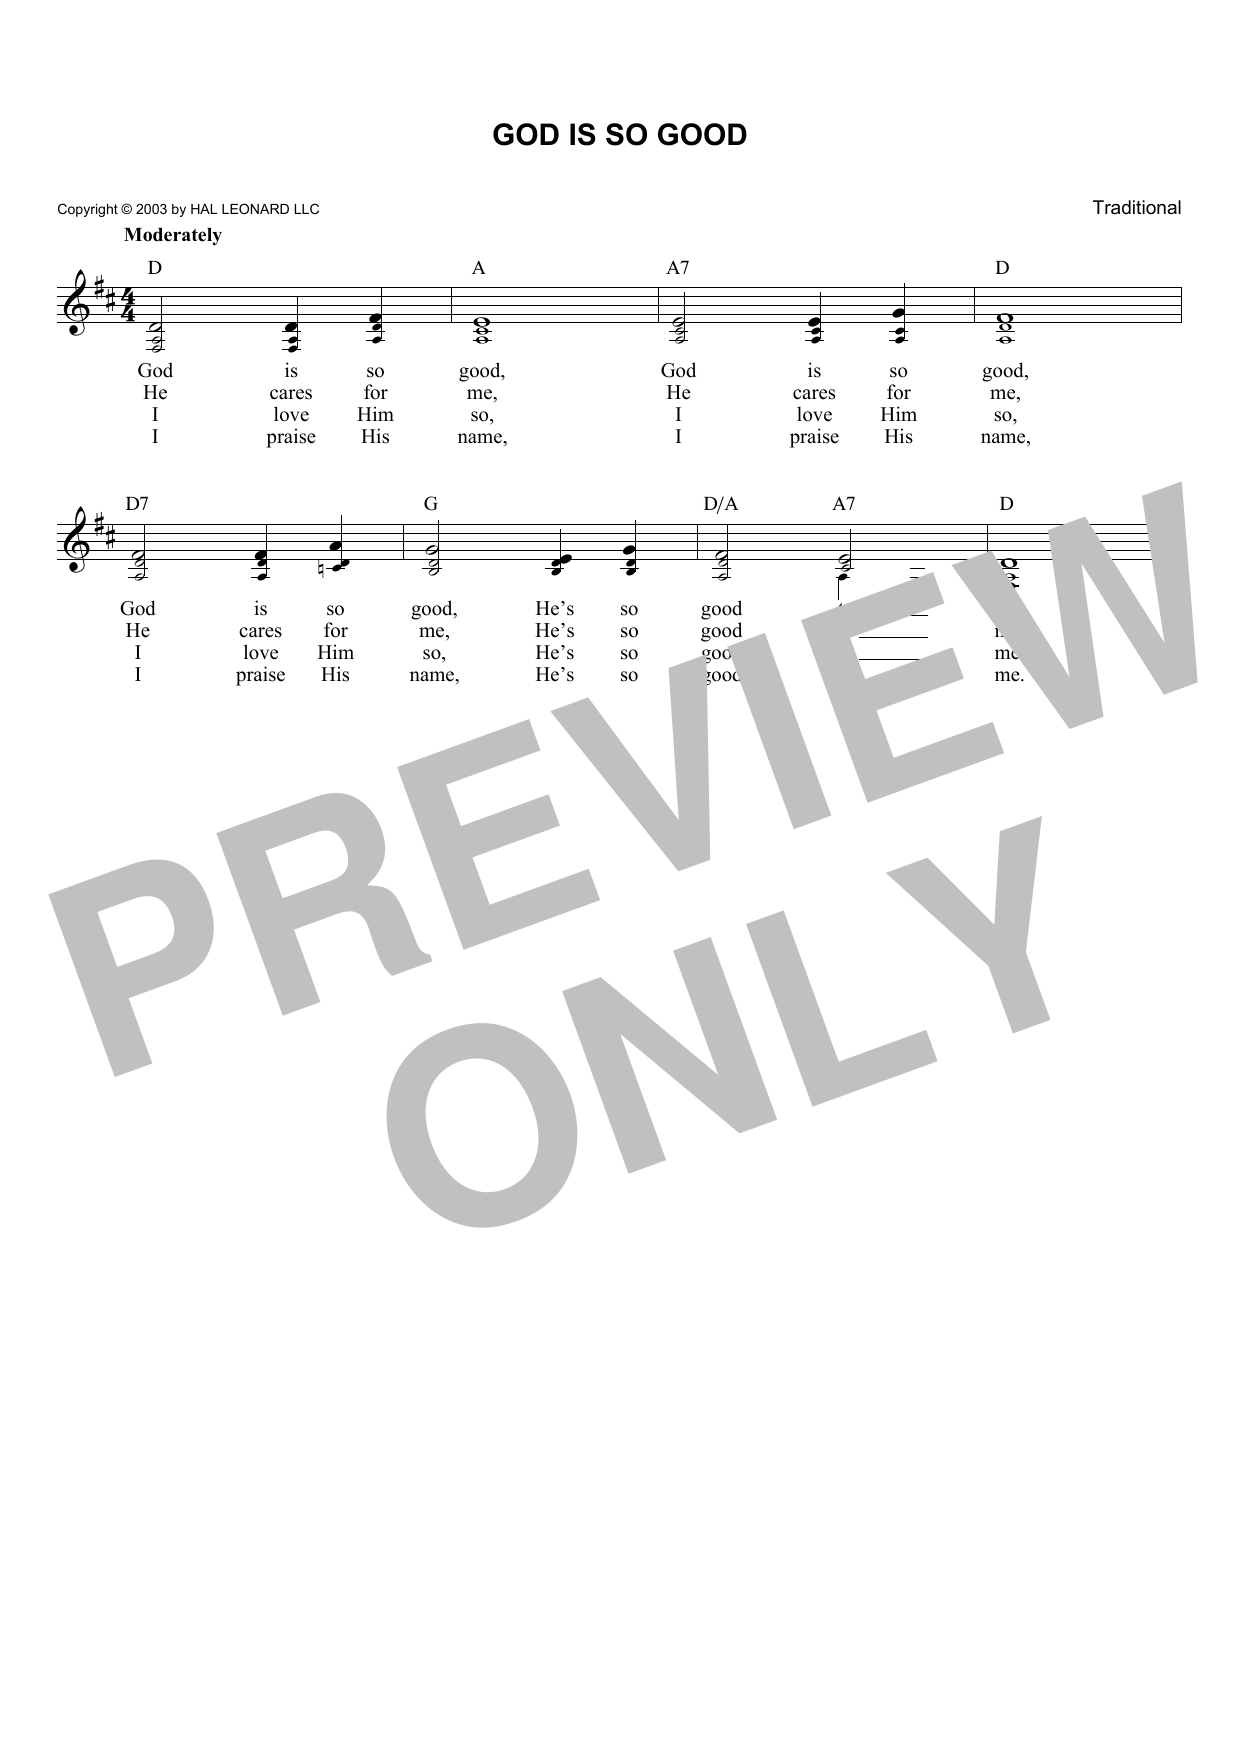 Download Traditional God Is So Good Sheet Music